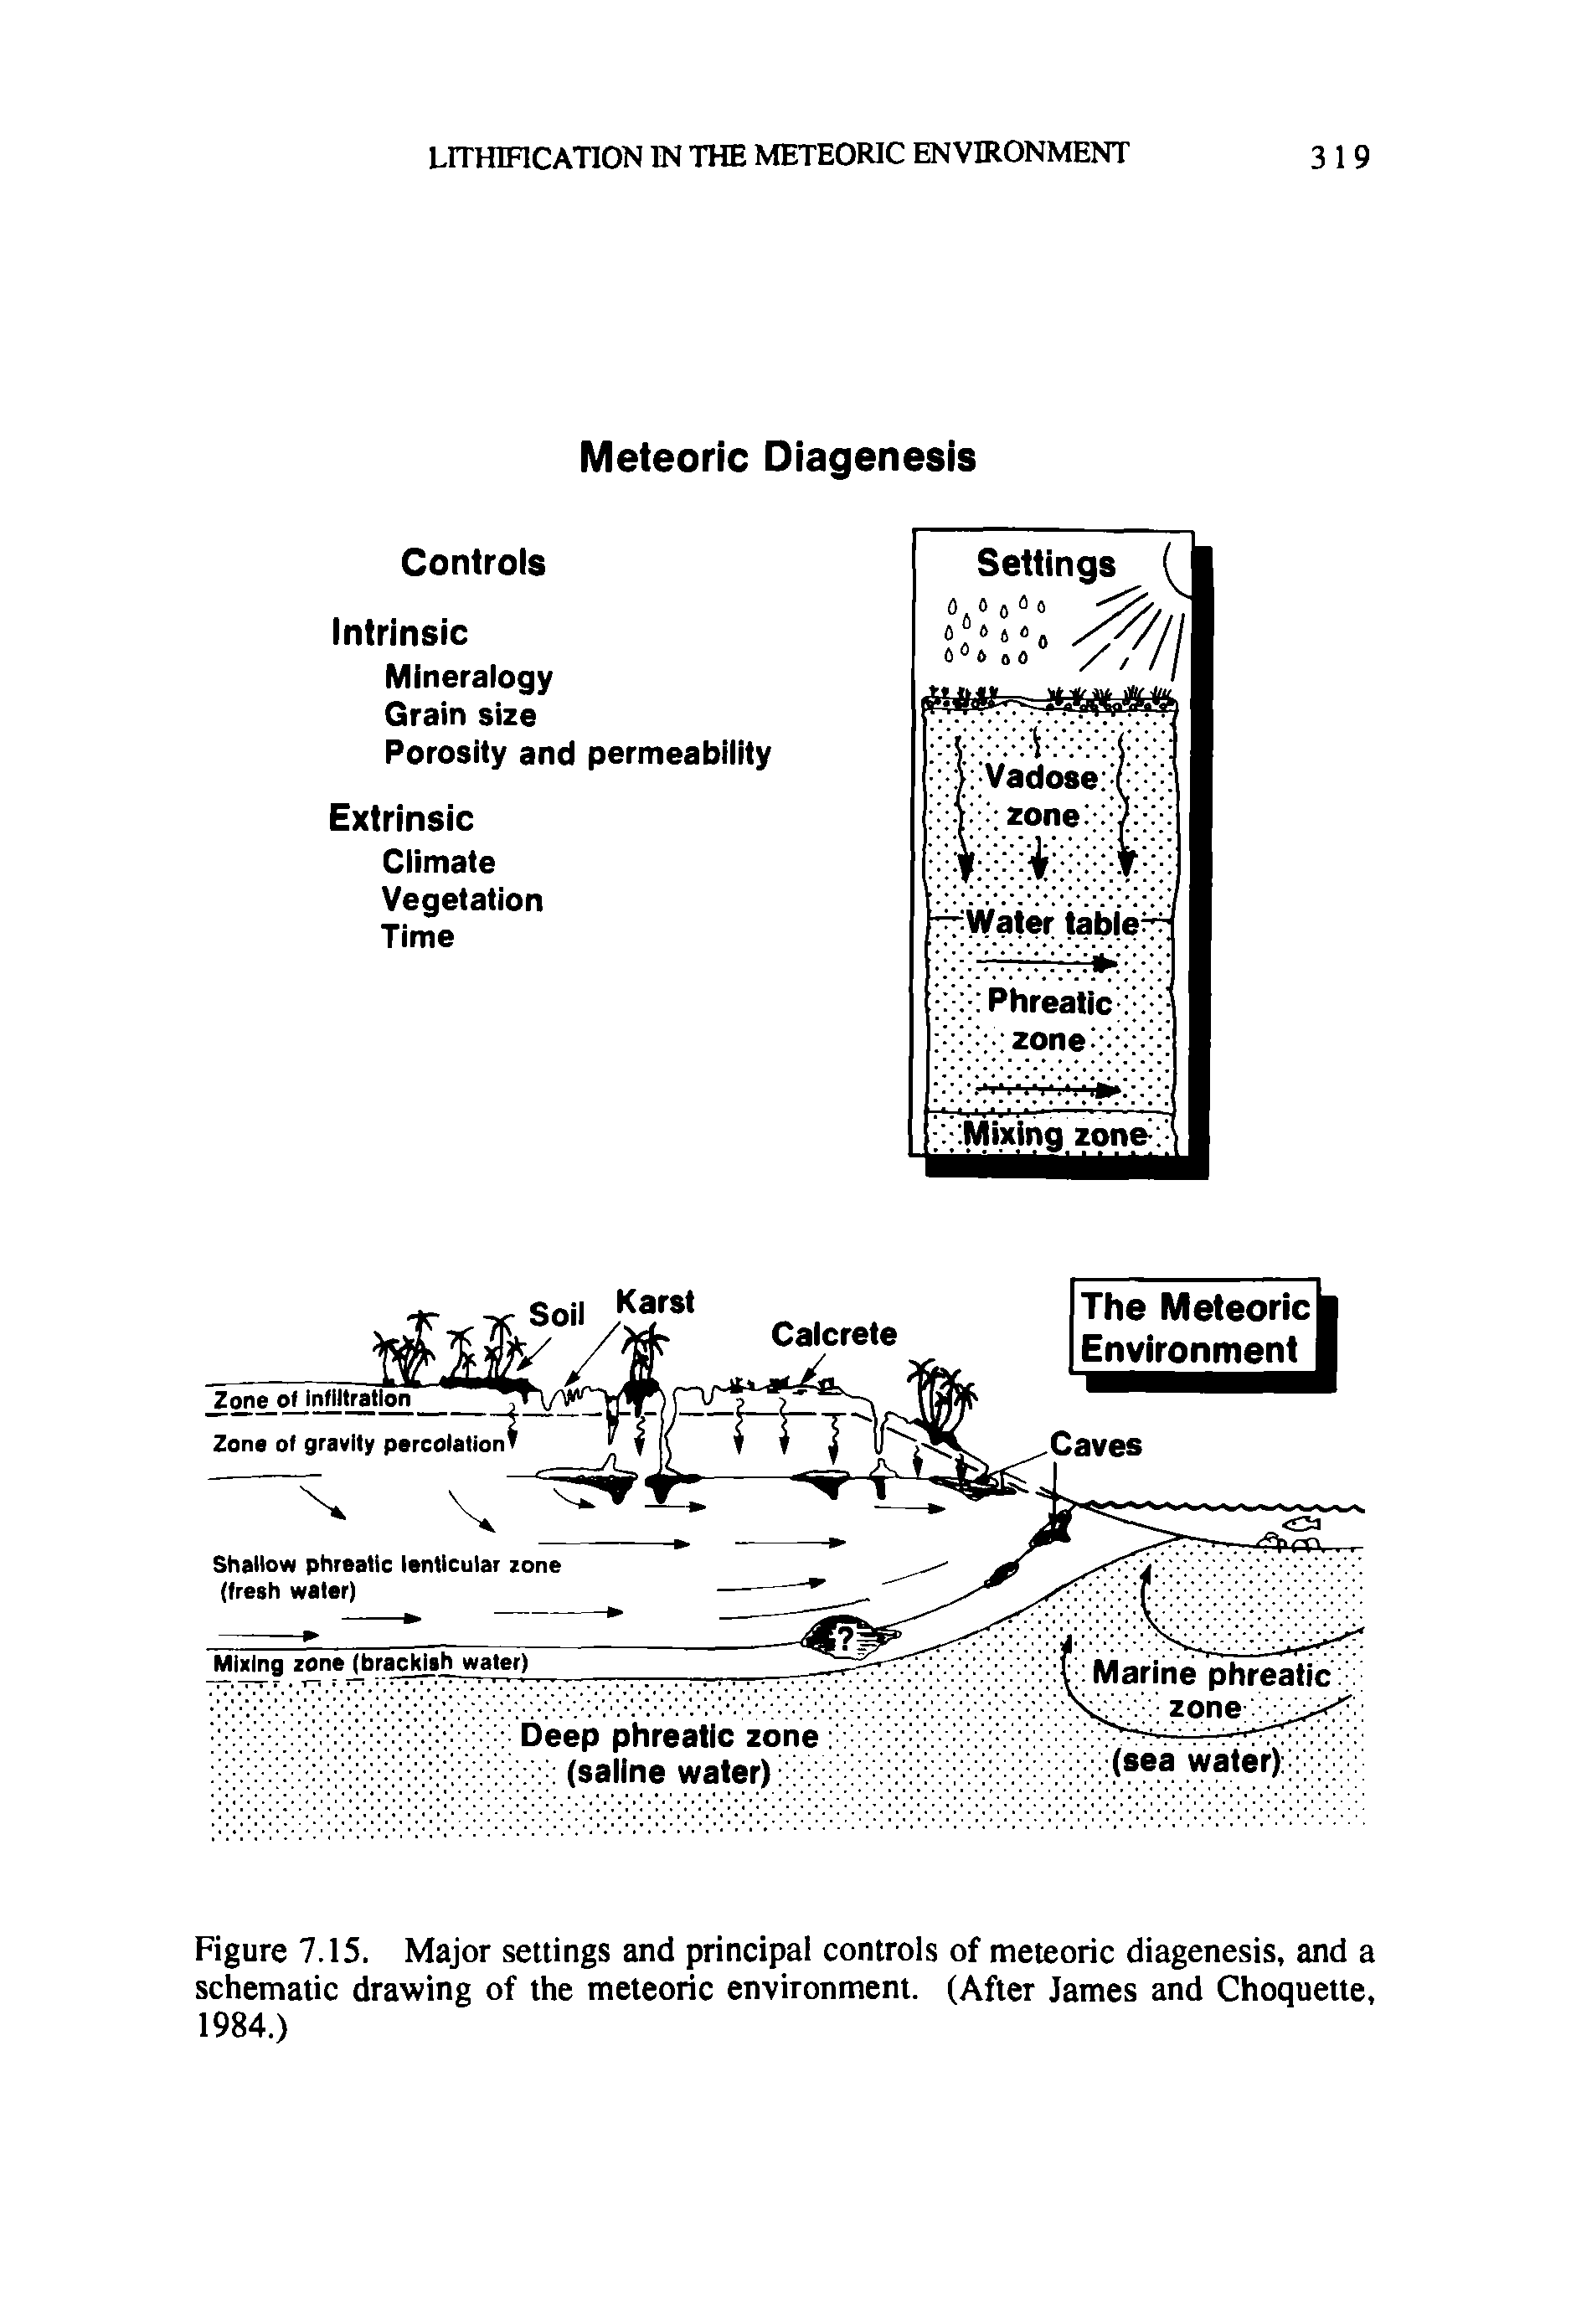 Figure 7.15. Major settings and principal controls of meteoric diagenesis, and a schematic drawing of the meteoric environment. (After James and Choquette, 1984.)...